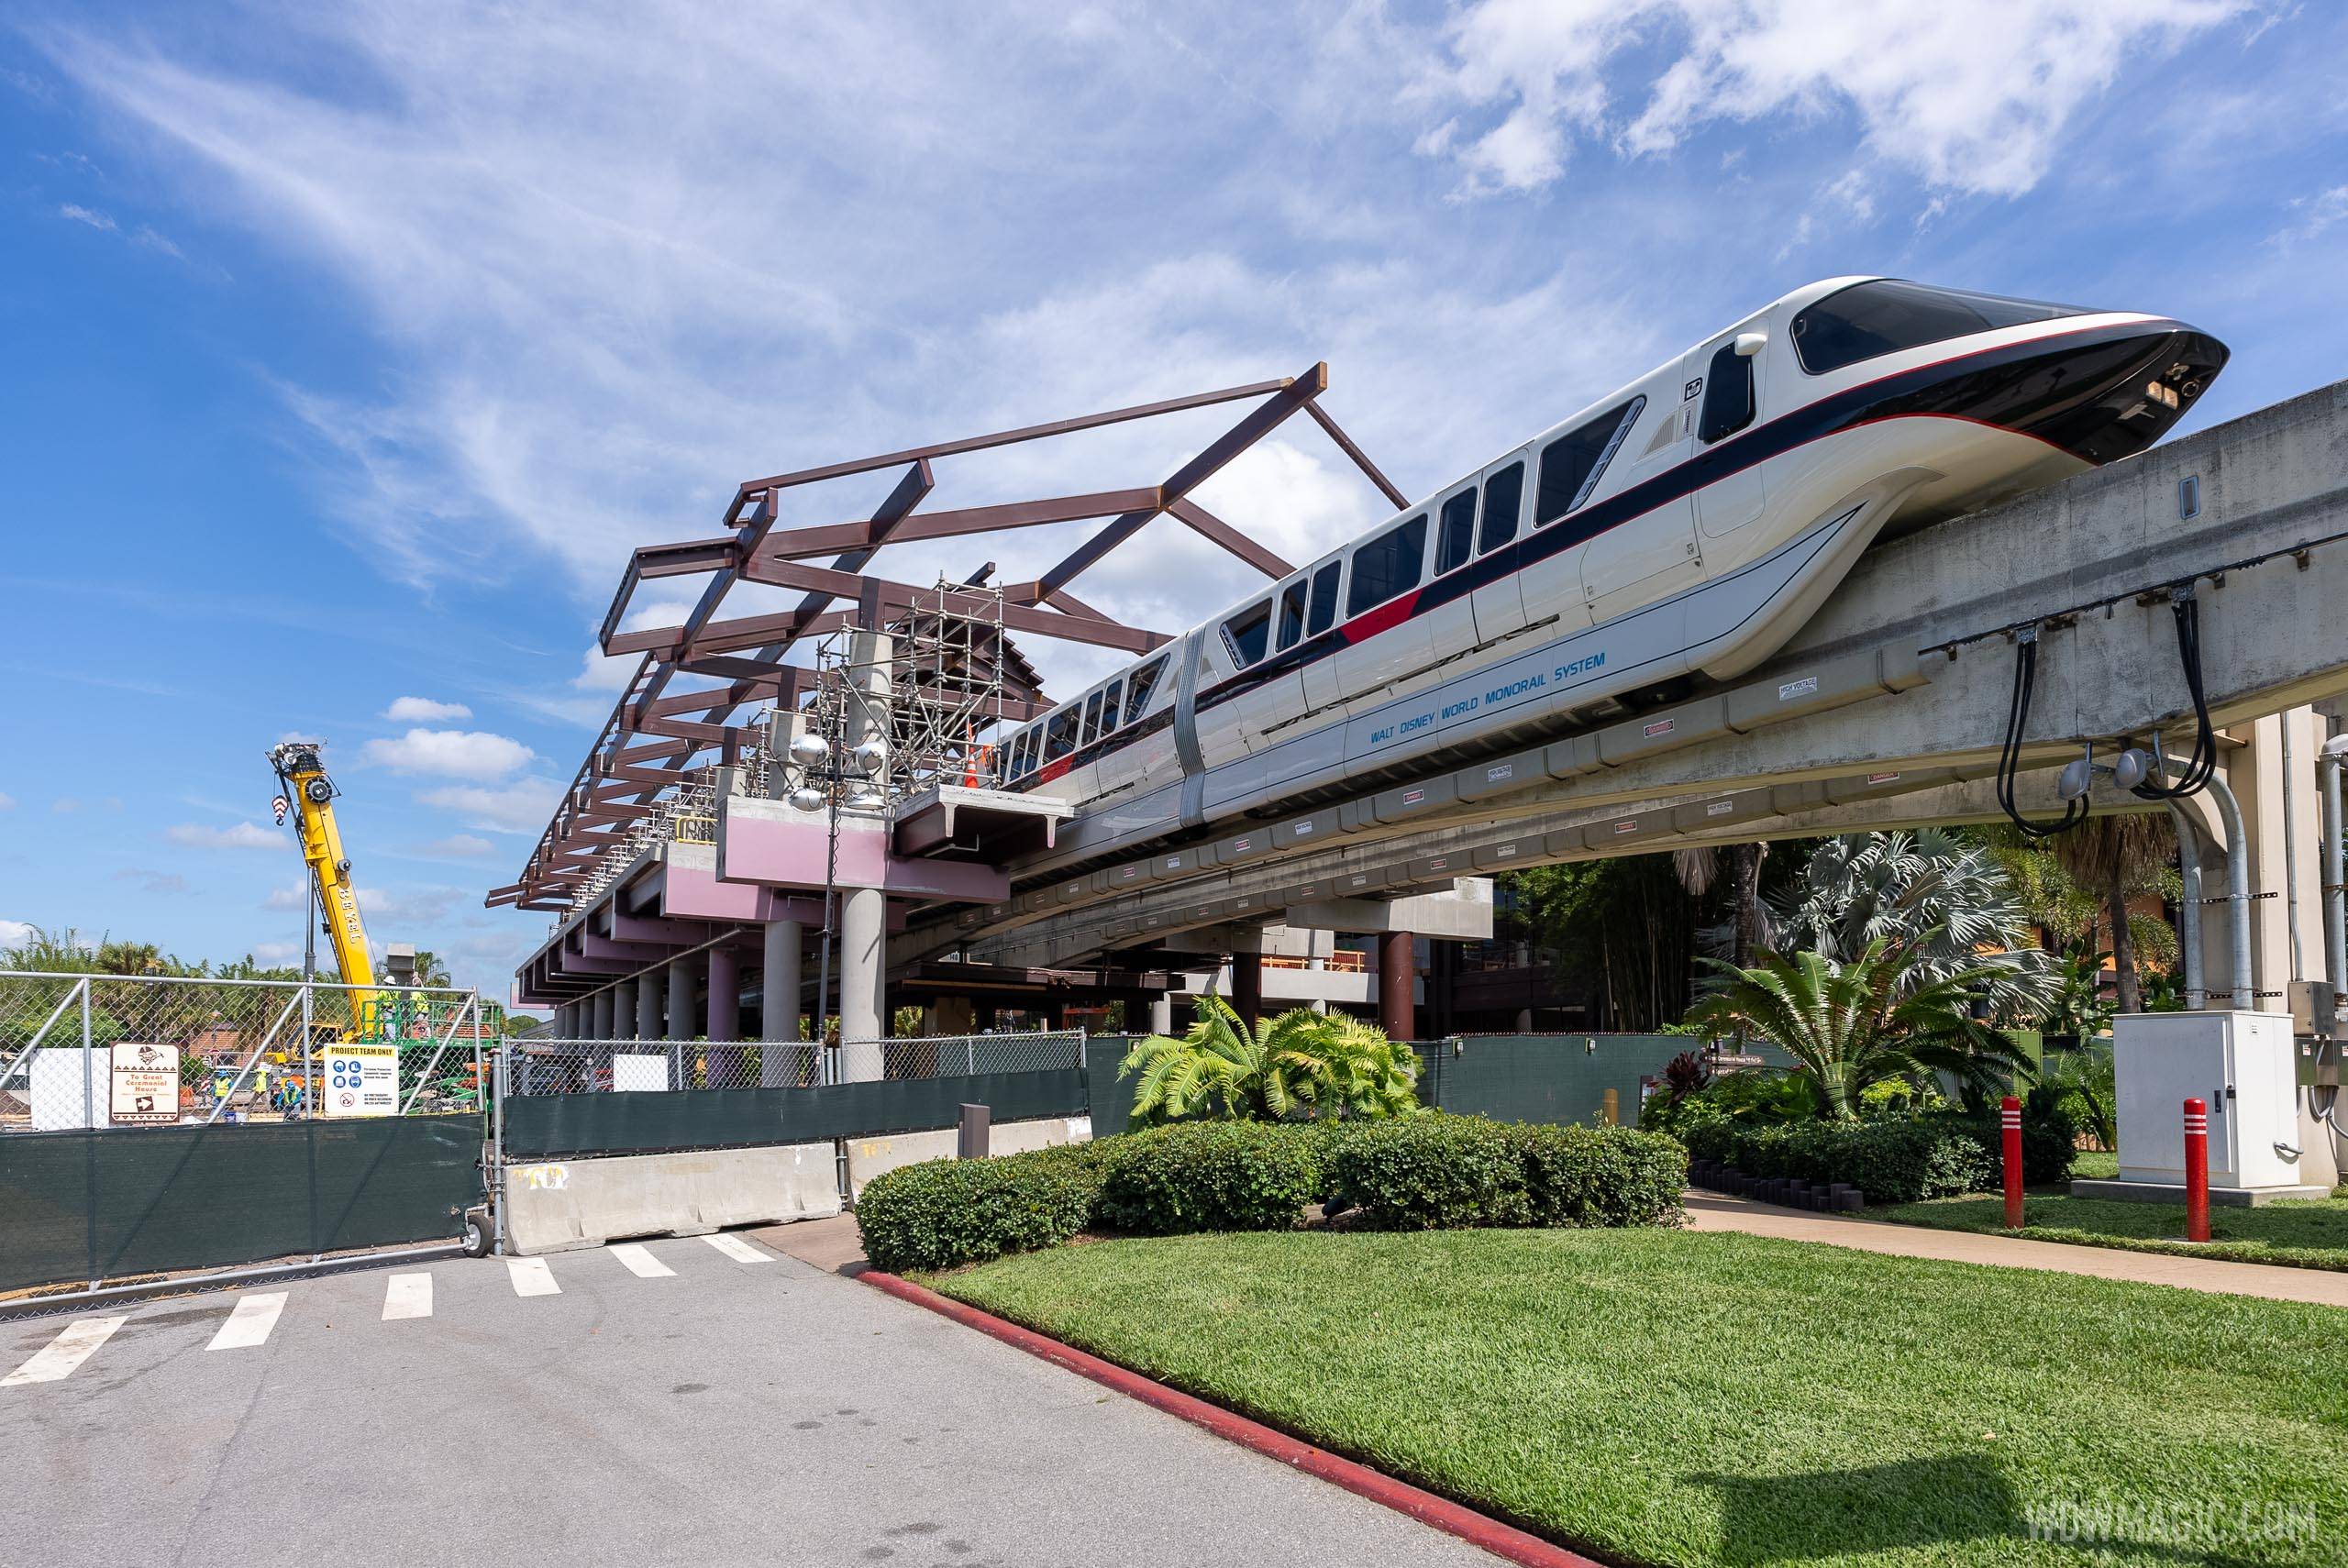 Monorail Black passes through the still under-construction monorail station